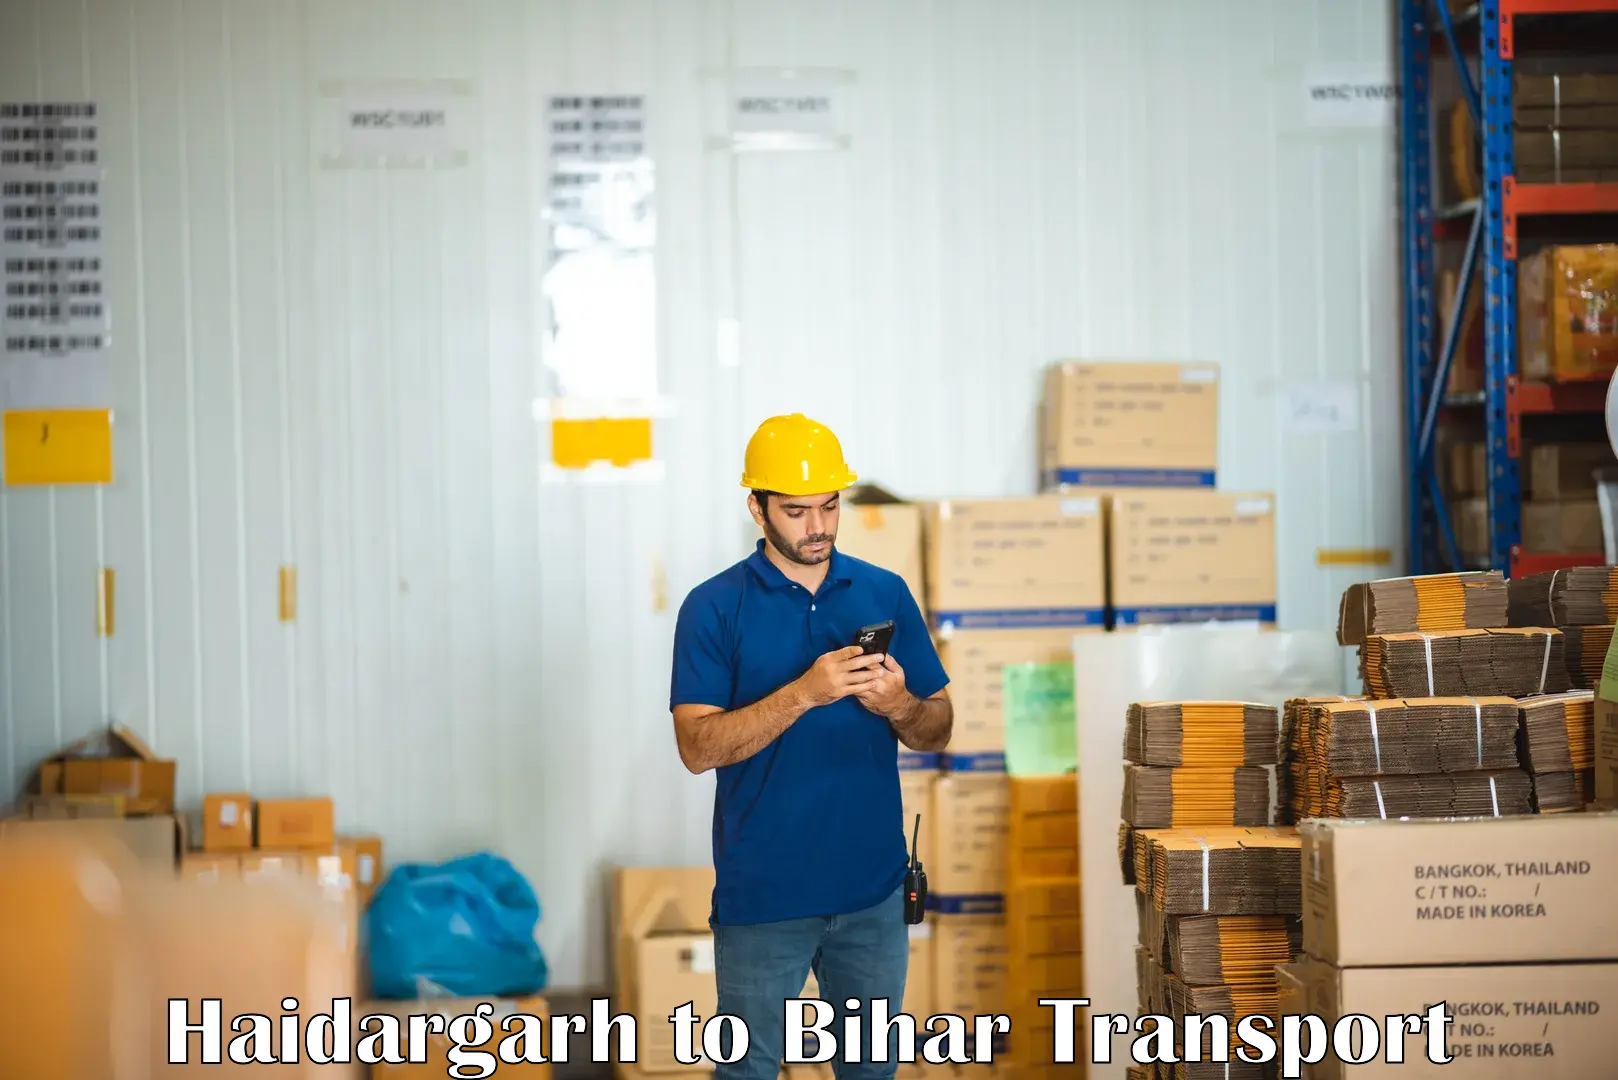 Container transportation services Haidargarh to Kamtaul